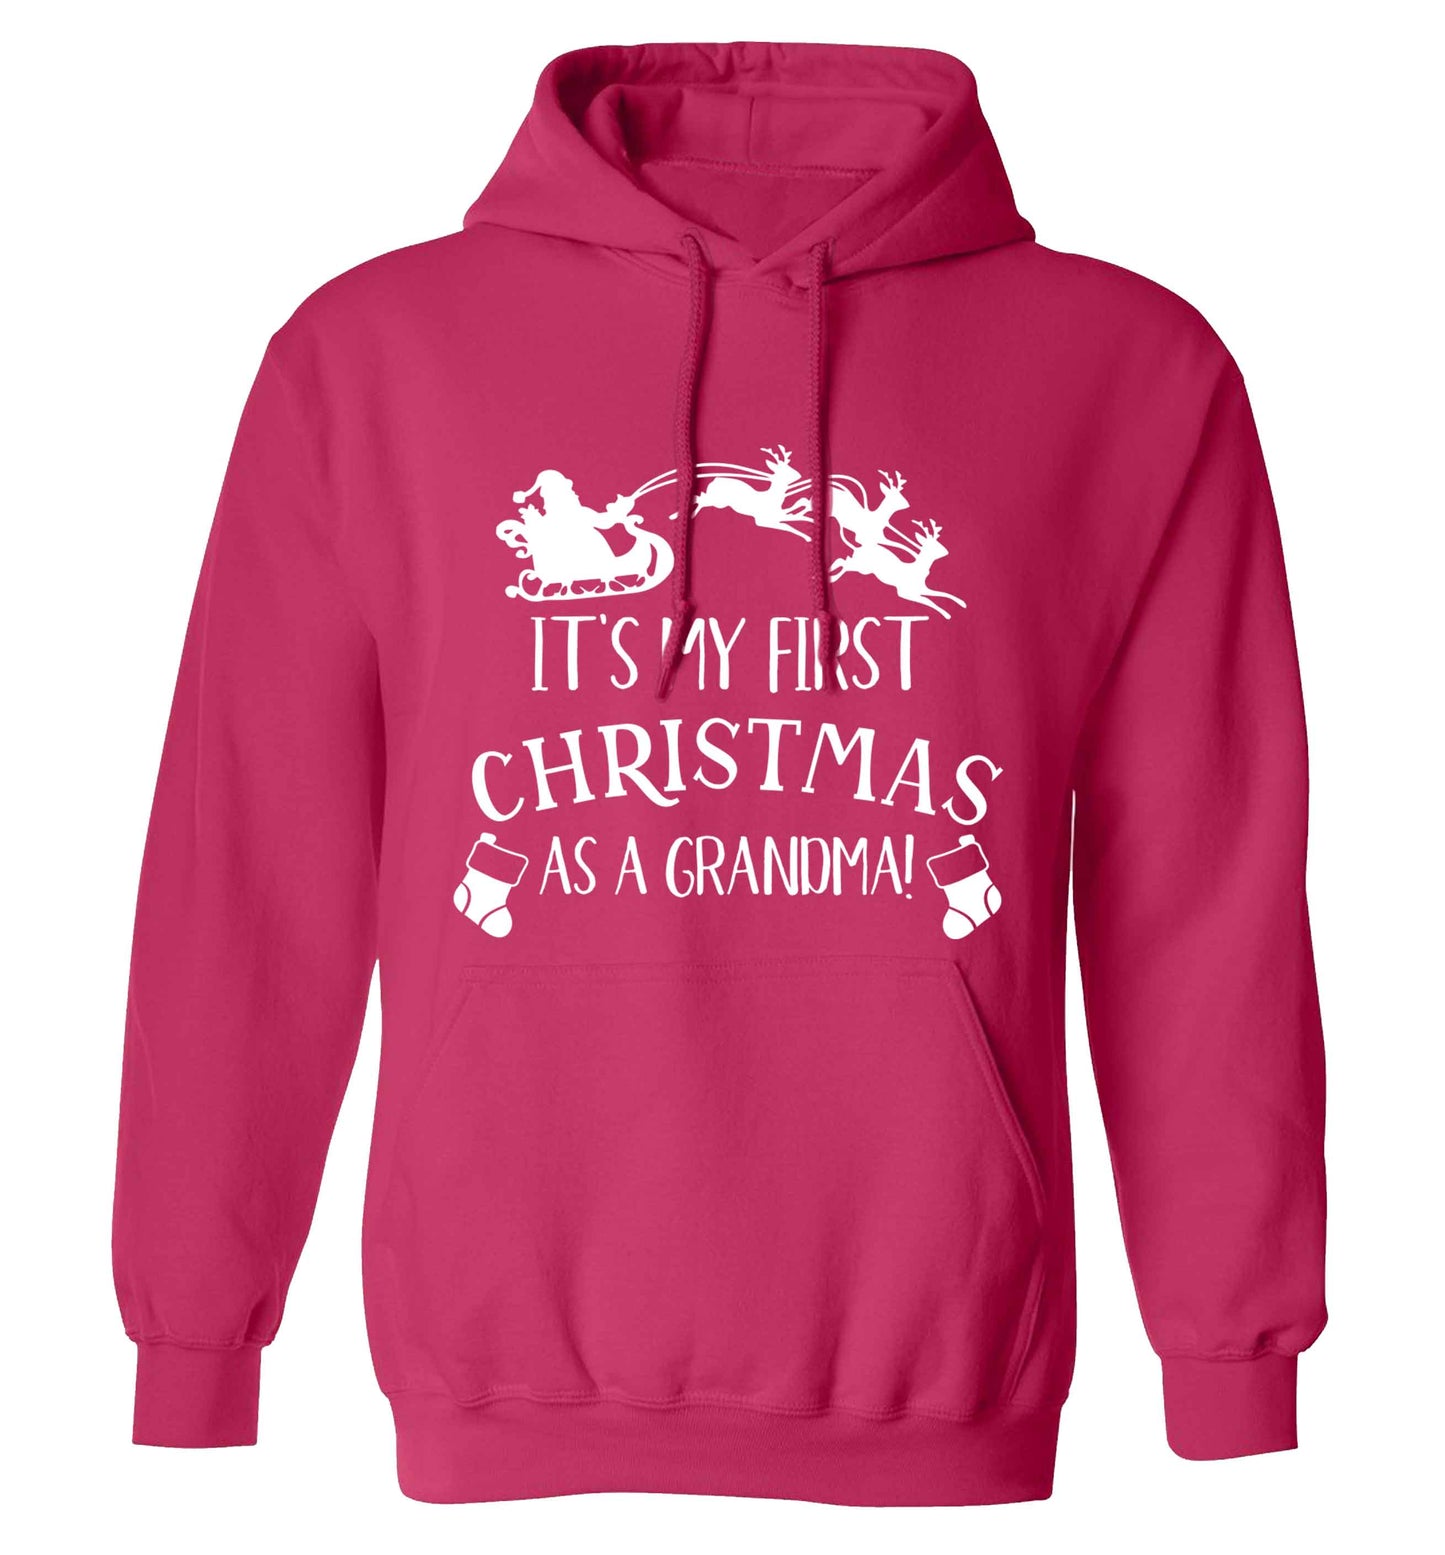 It's my first Christmas as a grandma! adults unisex pink hoodie 2XL